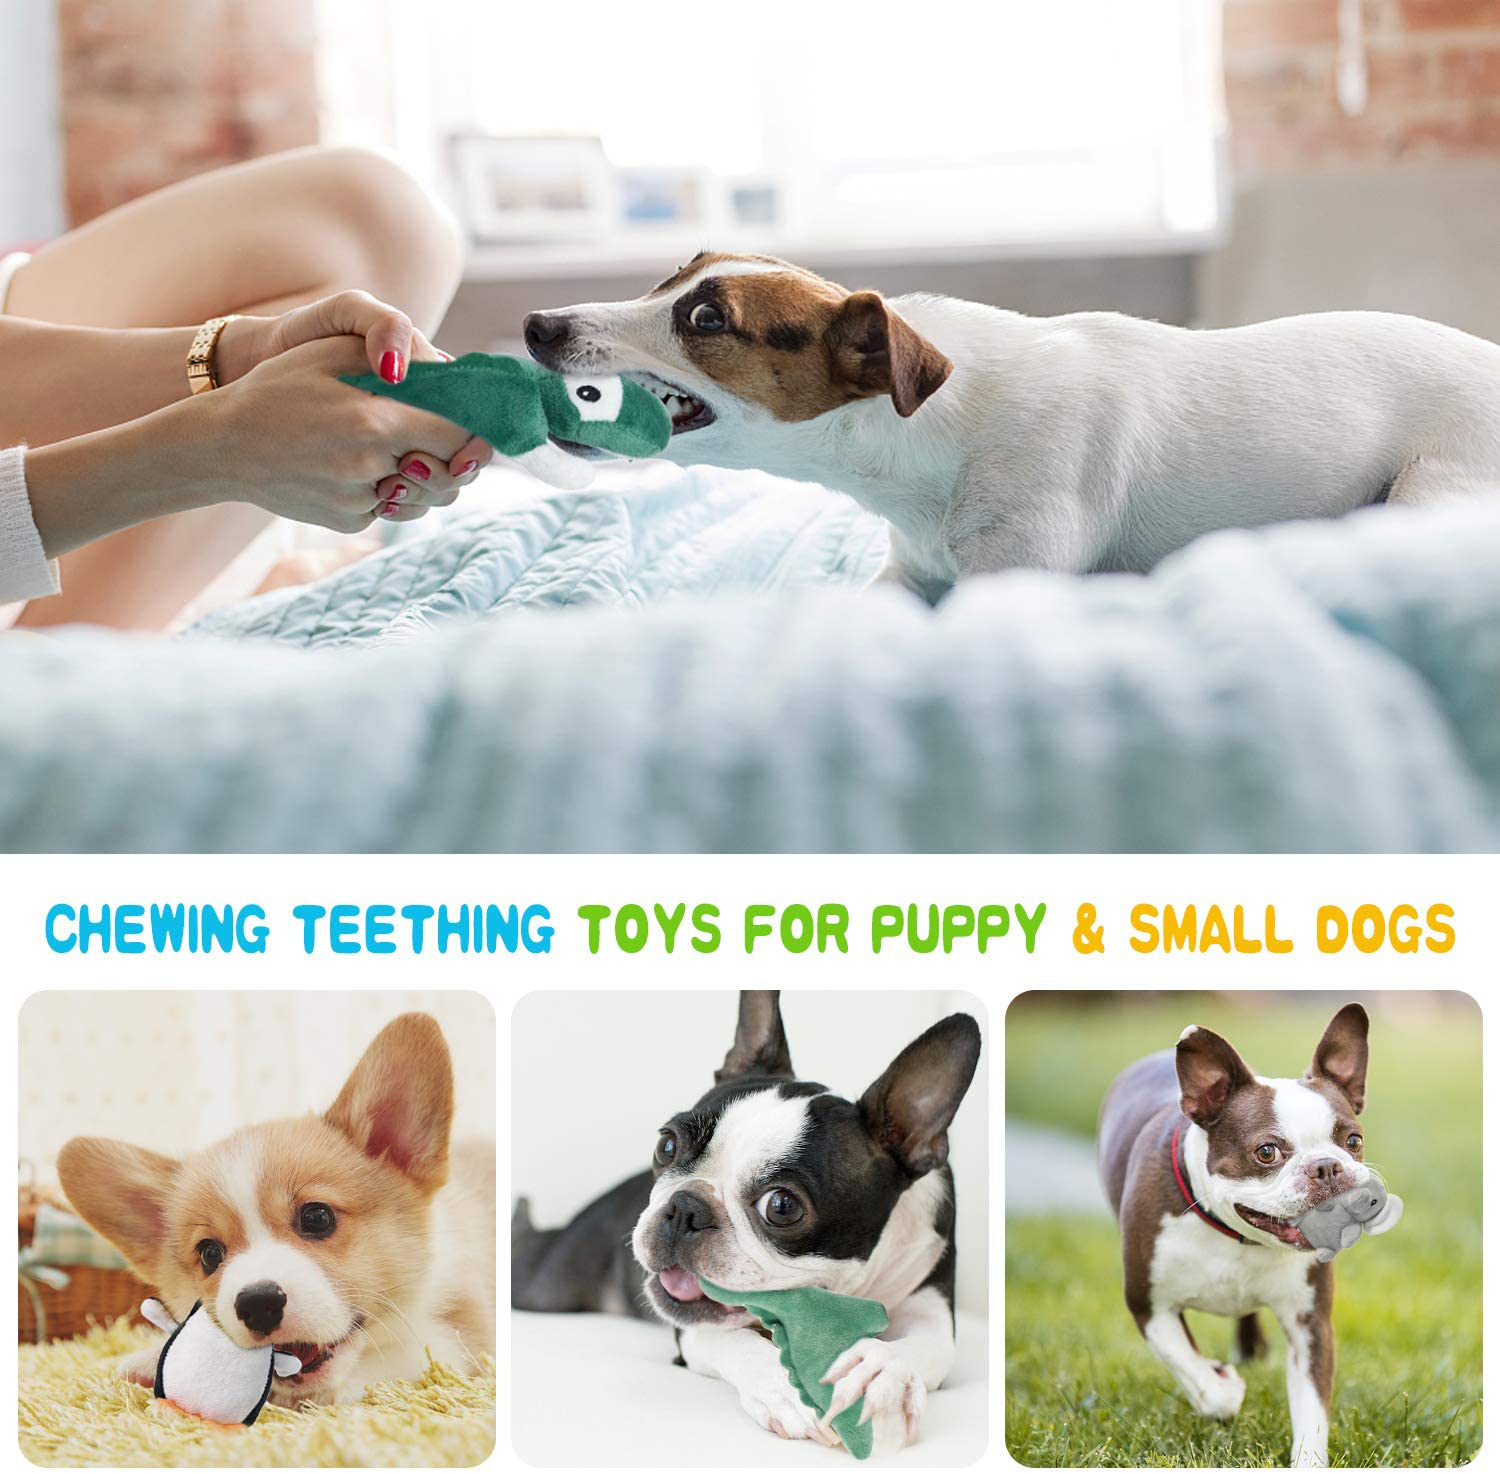 Squeaky Dog Toys for Puppy Small Medium Dogs, Stuffed Samll Dog Toys Bulk with 12 Plush Pet Dog Toy Set, Cute Safe Dog Chew Toys Pack for Puppies Teething Animals & Pet Supplies > Pet Supplies > Dog Supplies > Dog Toys LEGEND SANDY   